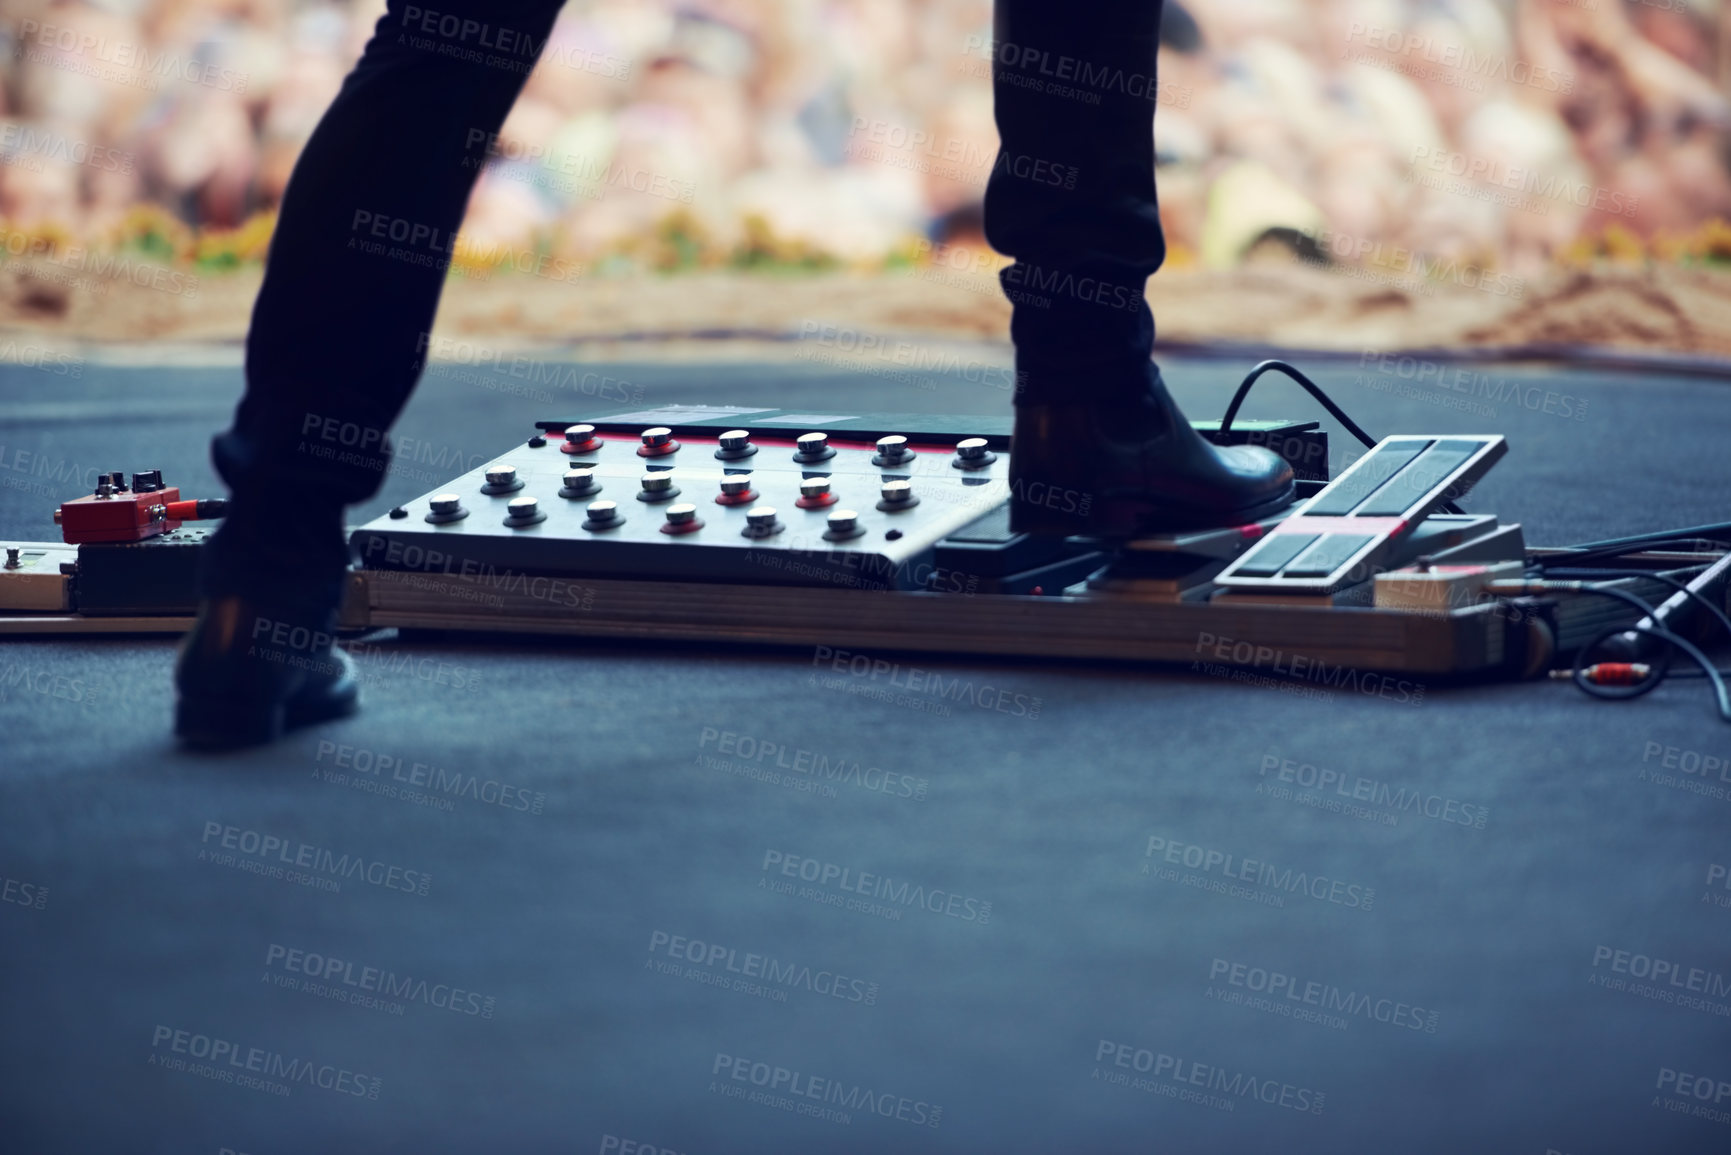 Buy stock photo Artist, stage and feet on equipment of instrument at concert, music festival or live event in Amsterdam. Performer, boots and pedal on platform for electric guitar for crowd, people and community